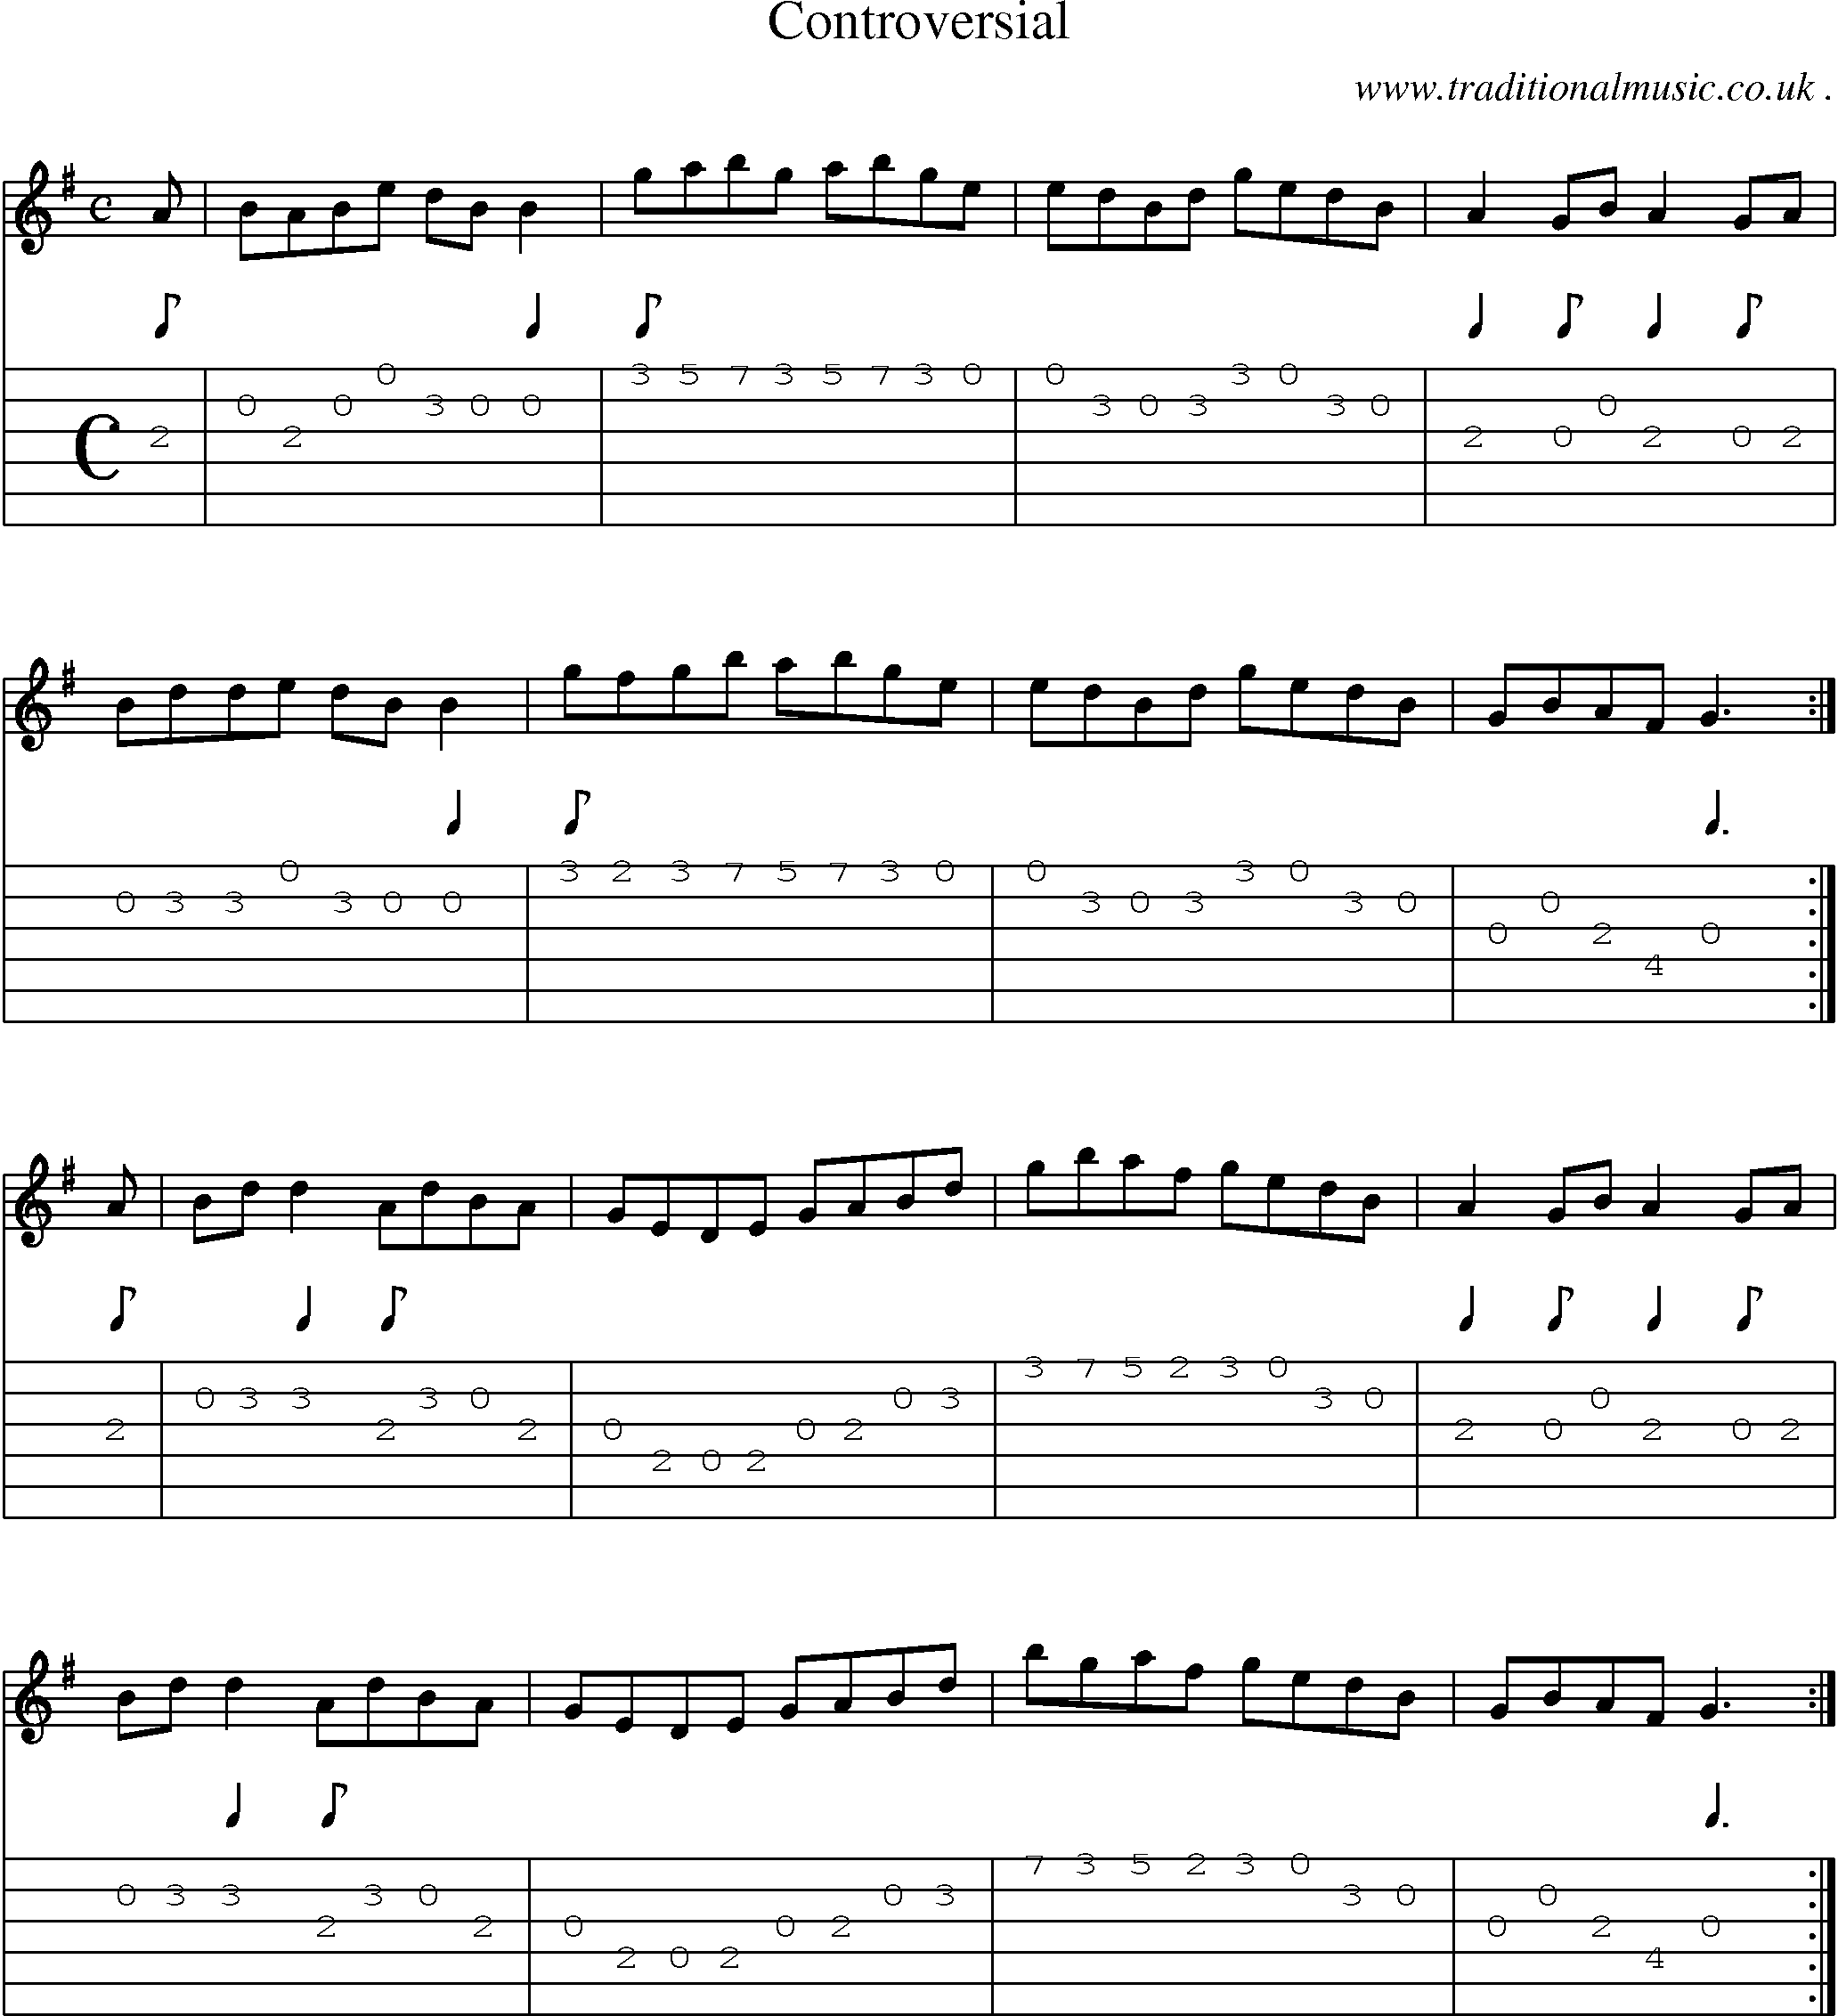 Sheet-Music and Guitar Tabs for Controversial